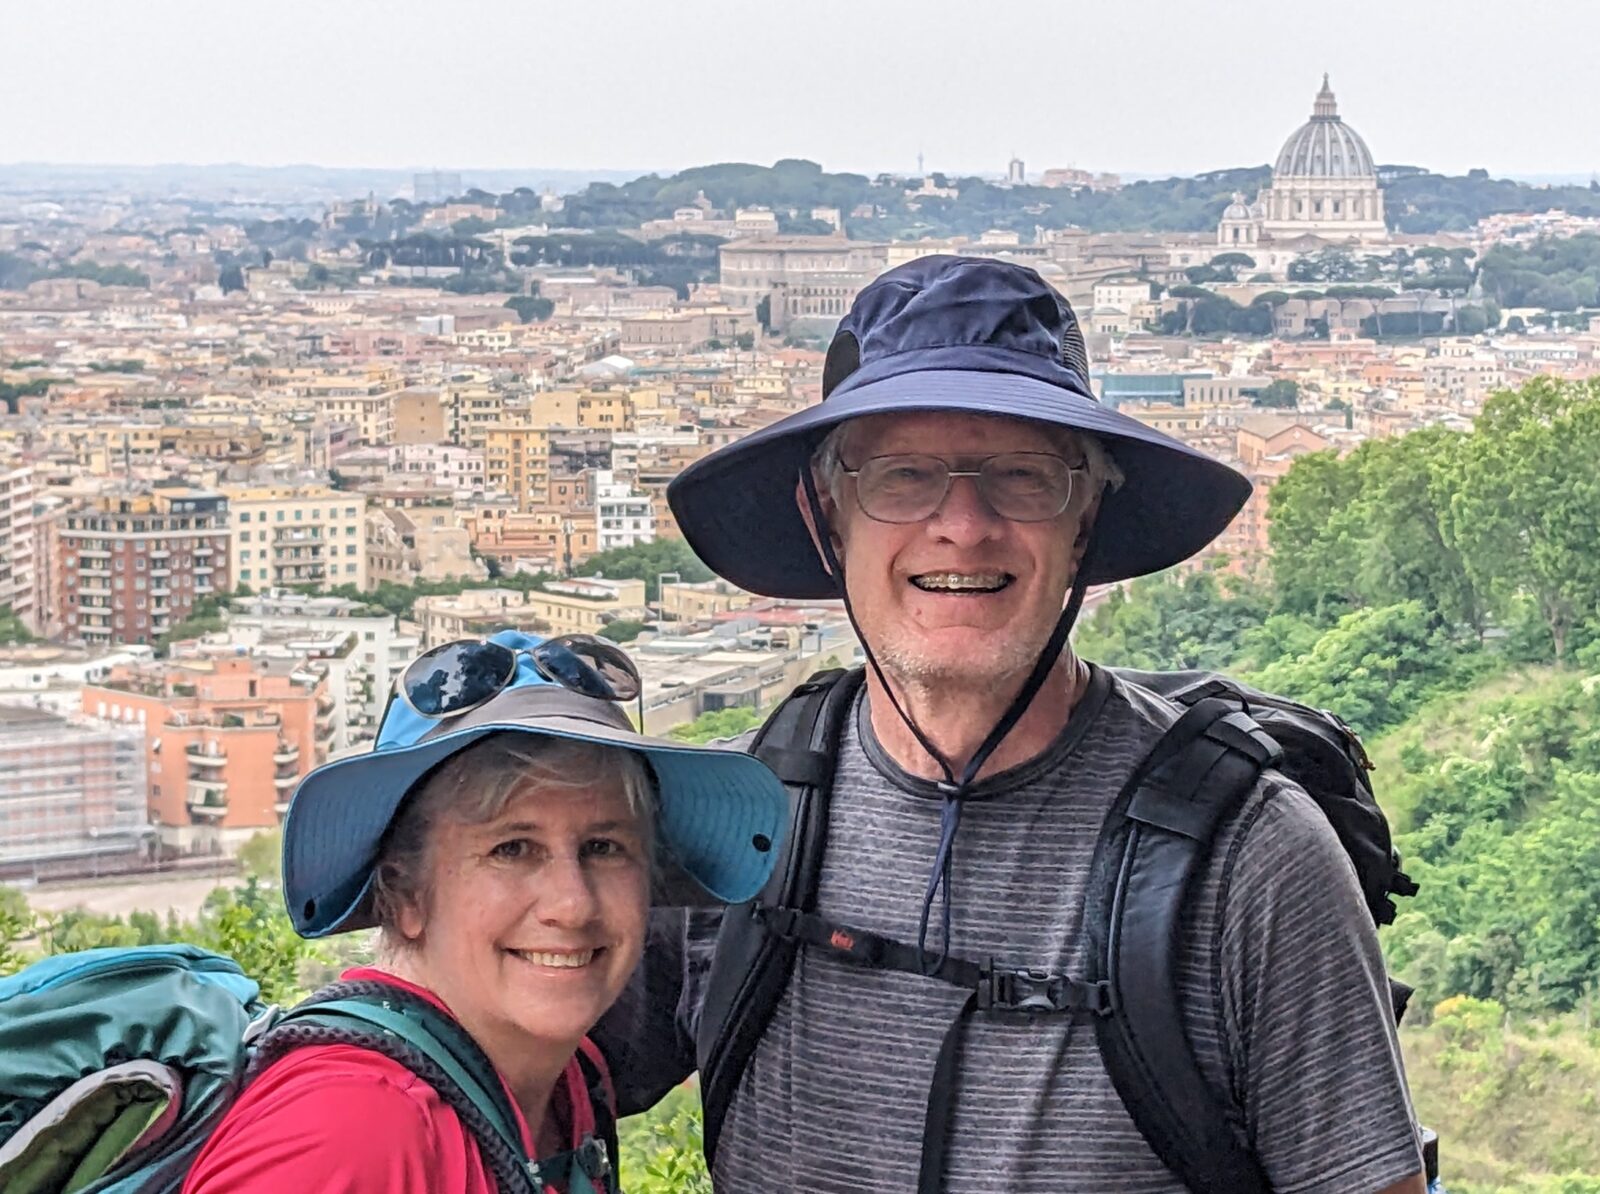 Karen and David Groh with St. Peter's Bascilica in the background